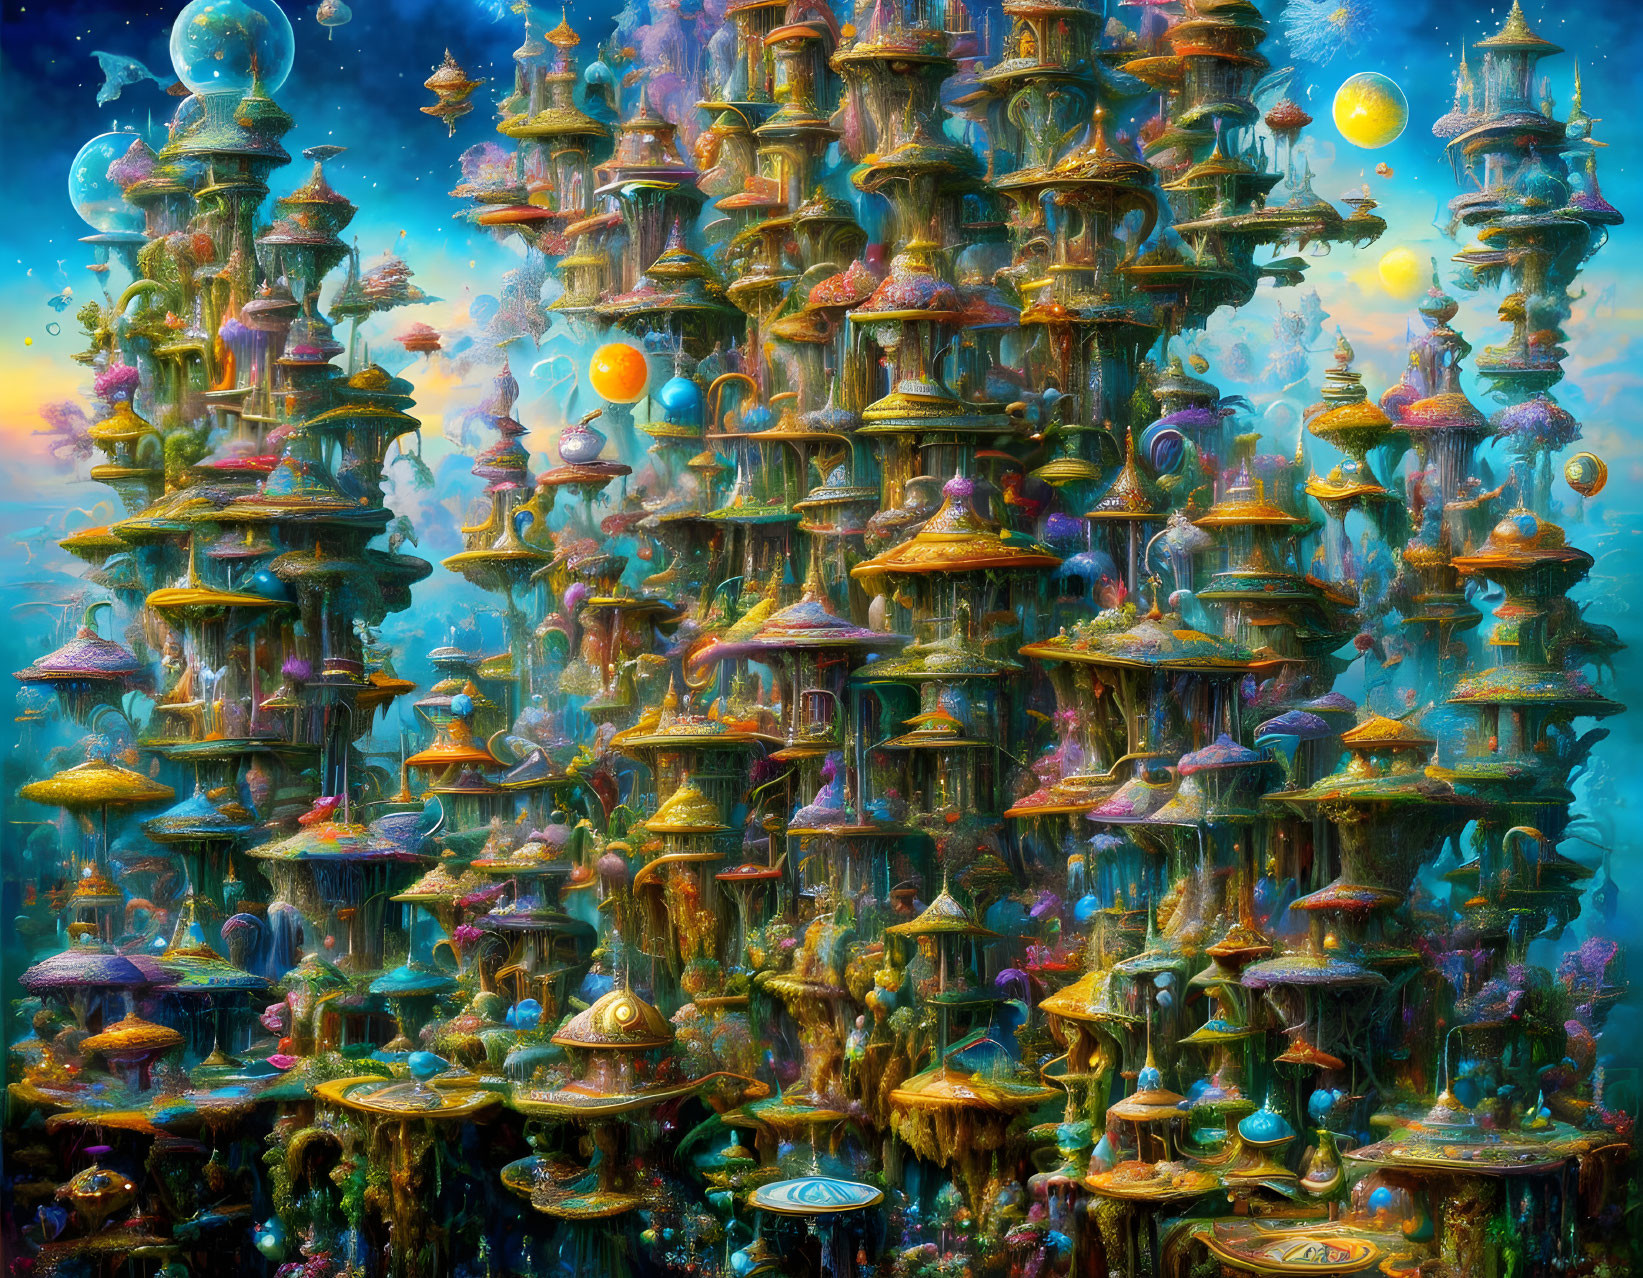 Fantastical cityscape with mushroom-like towers in a starry cosmos